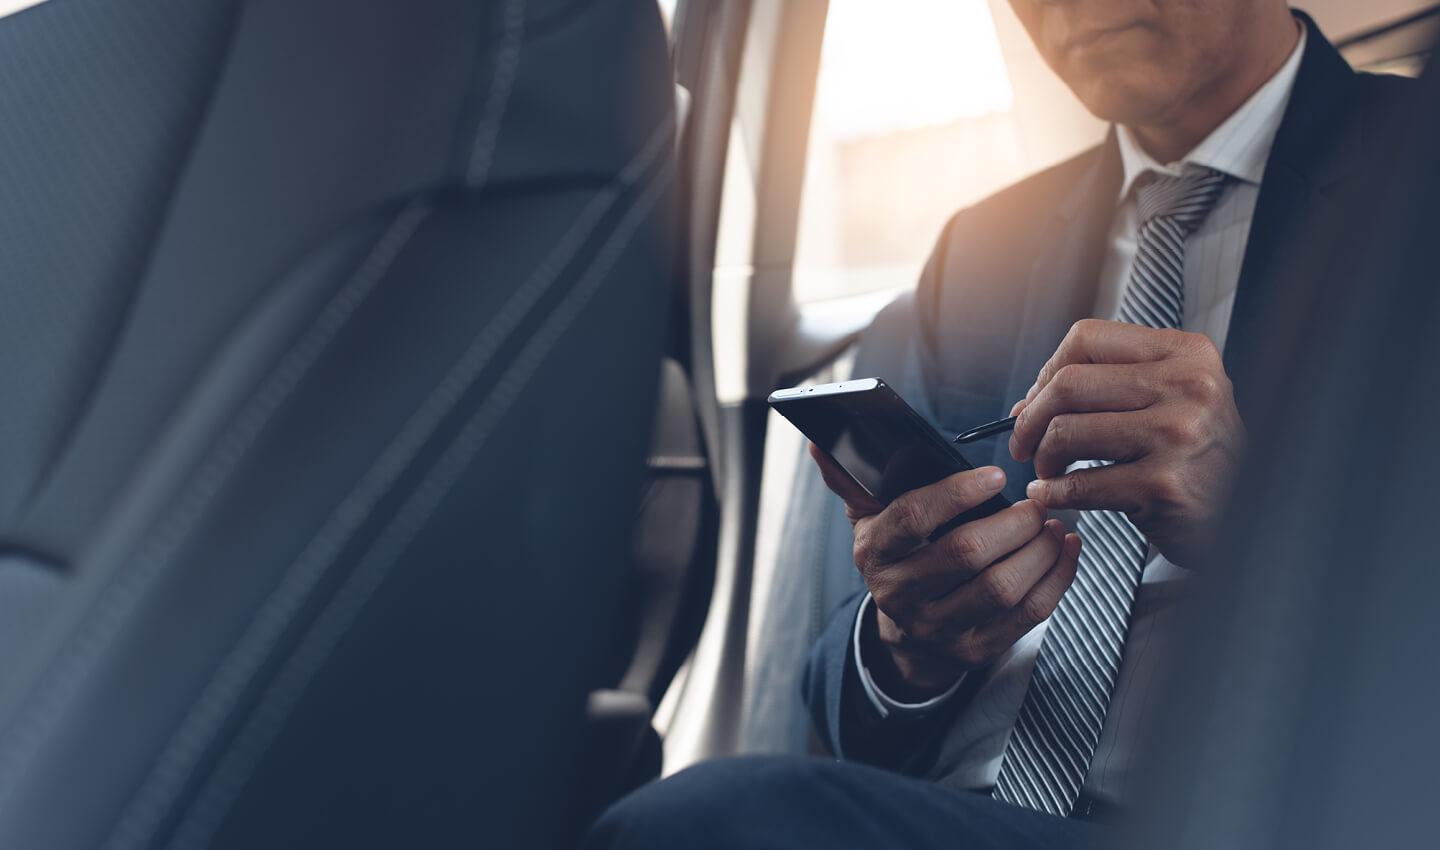 An executive using his mobile device in a car